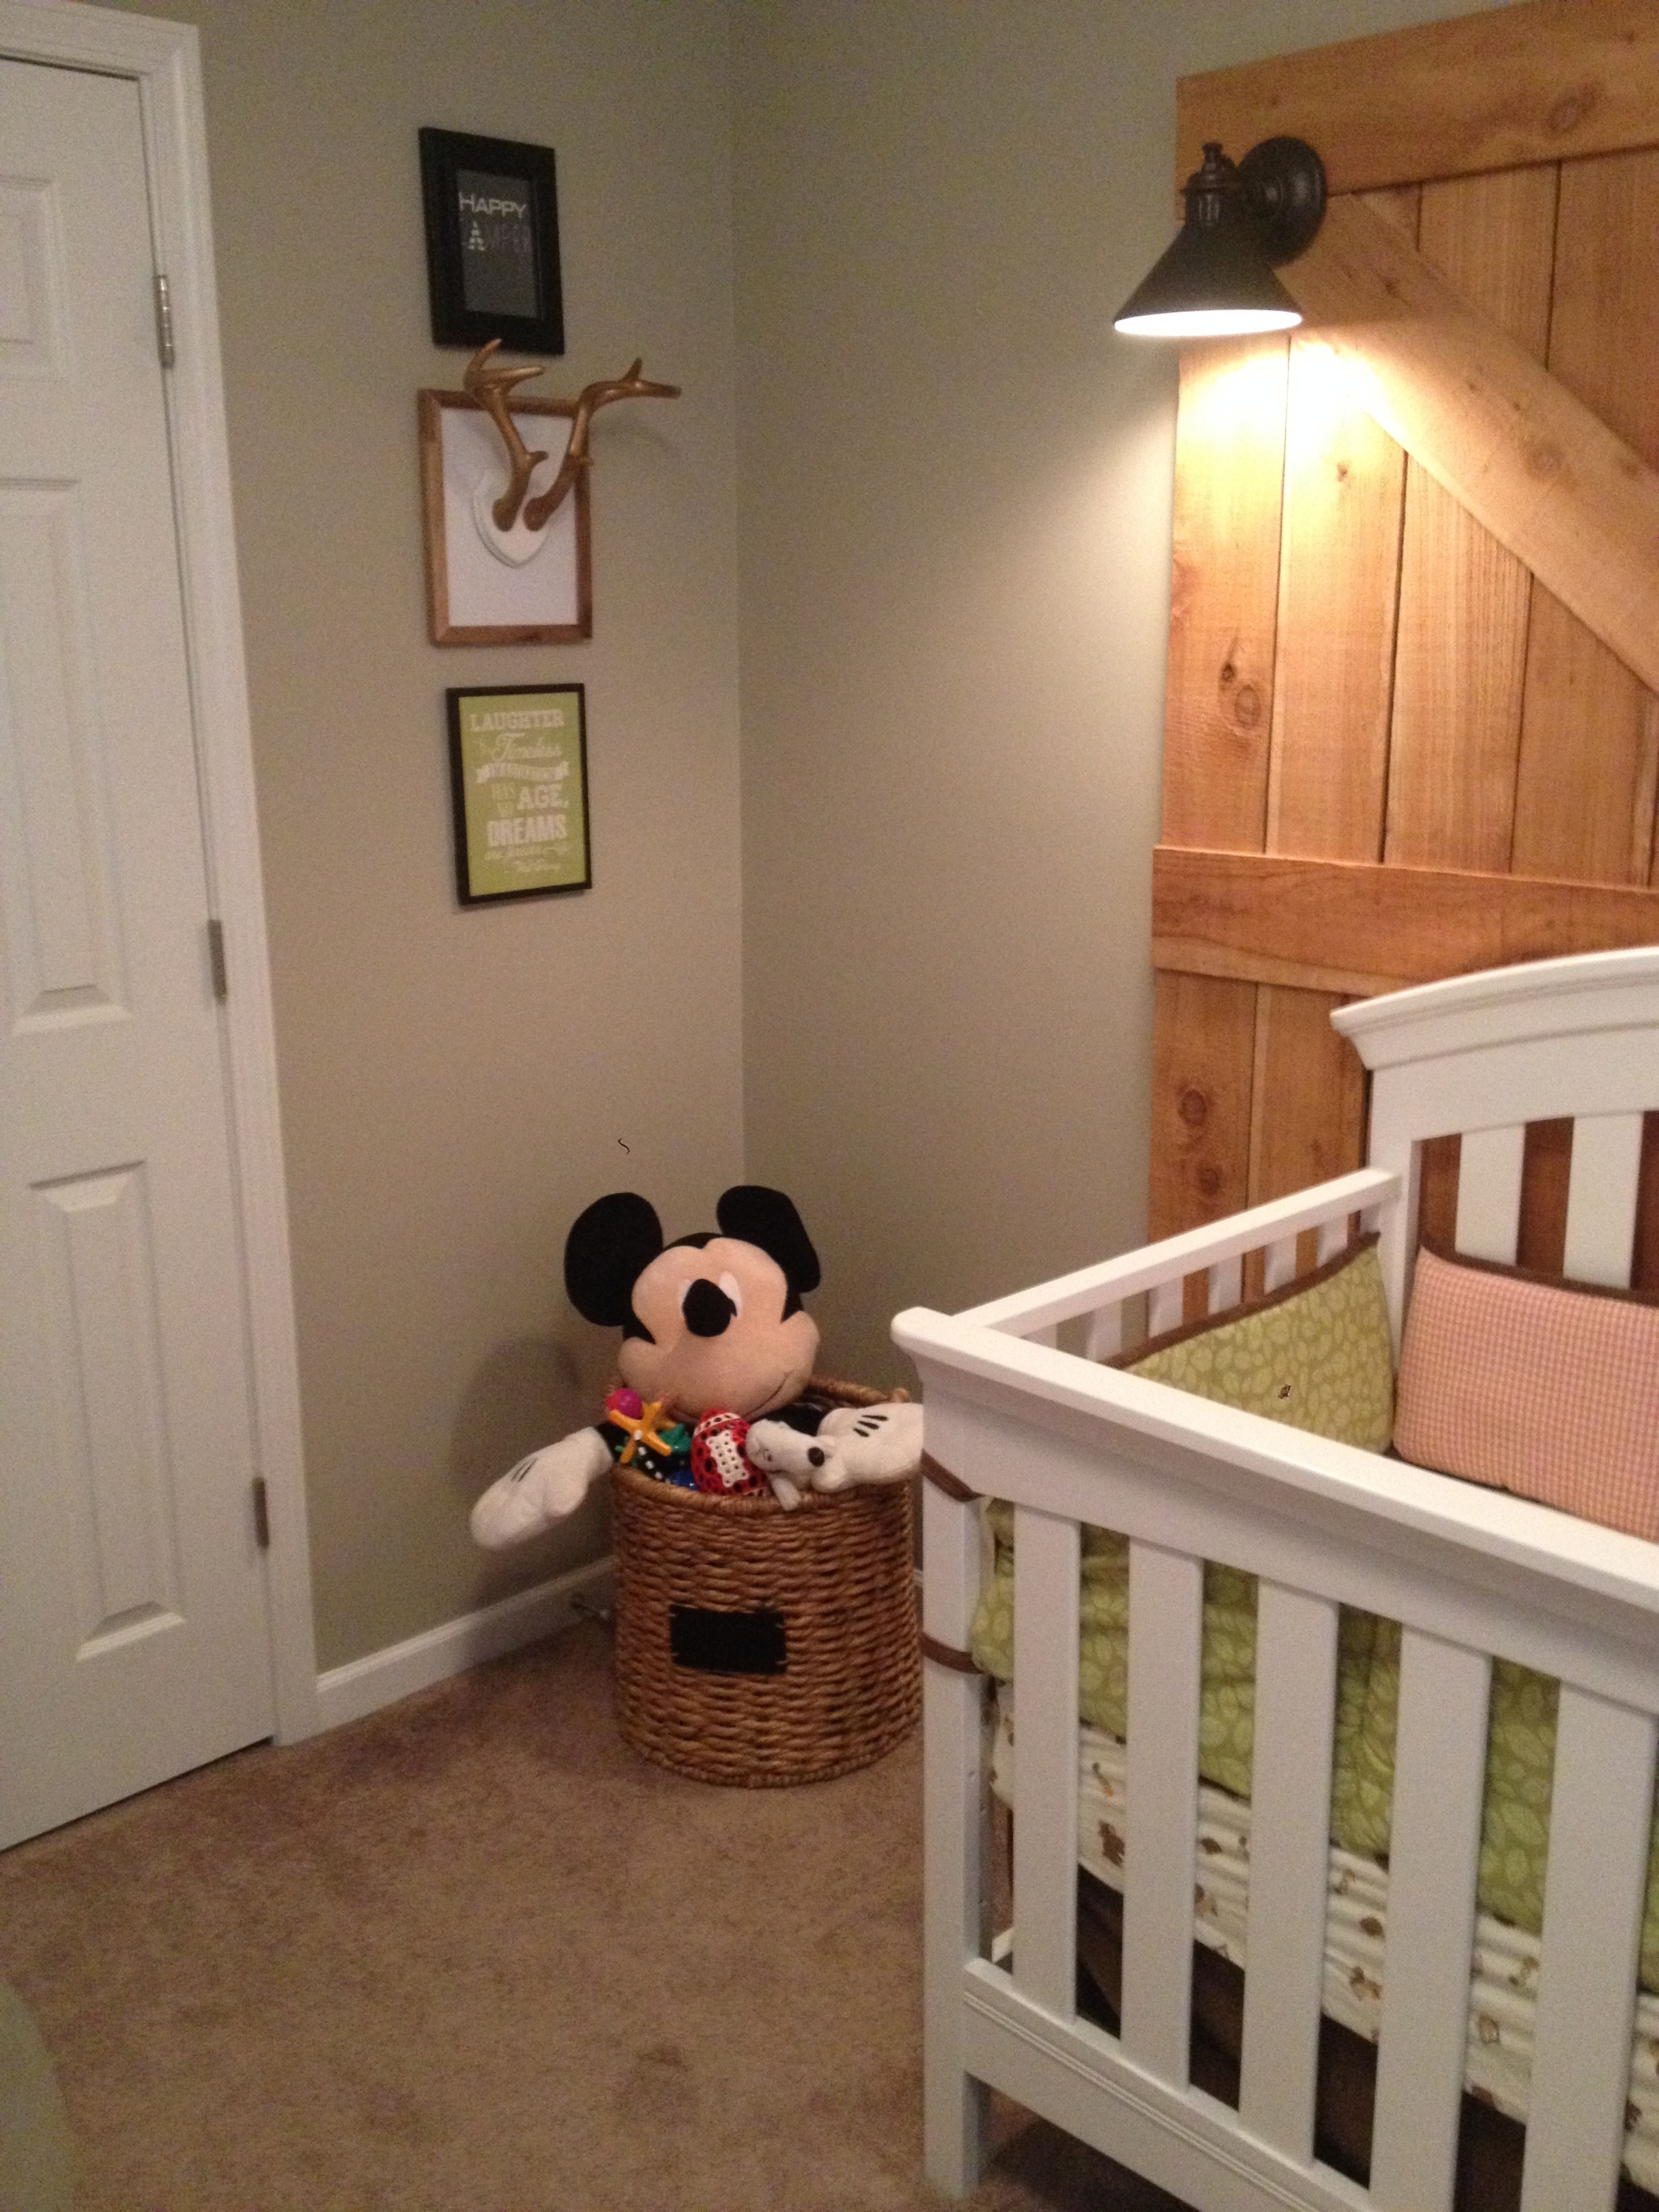 Deer Antlers in Frame and Mickey Mouse Plush